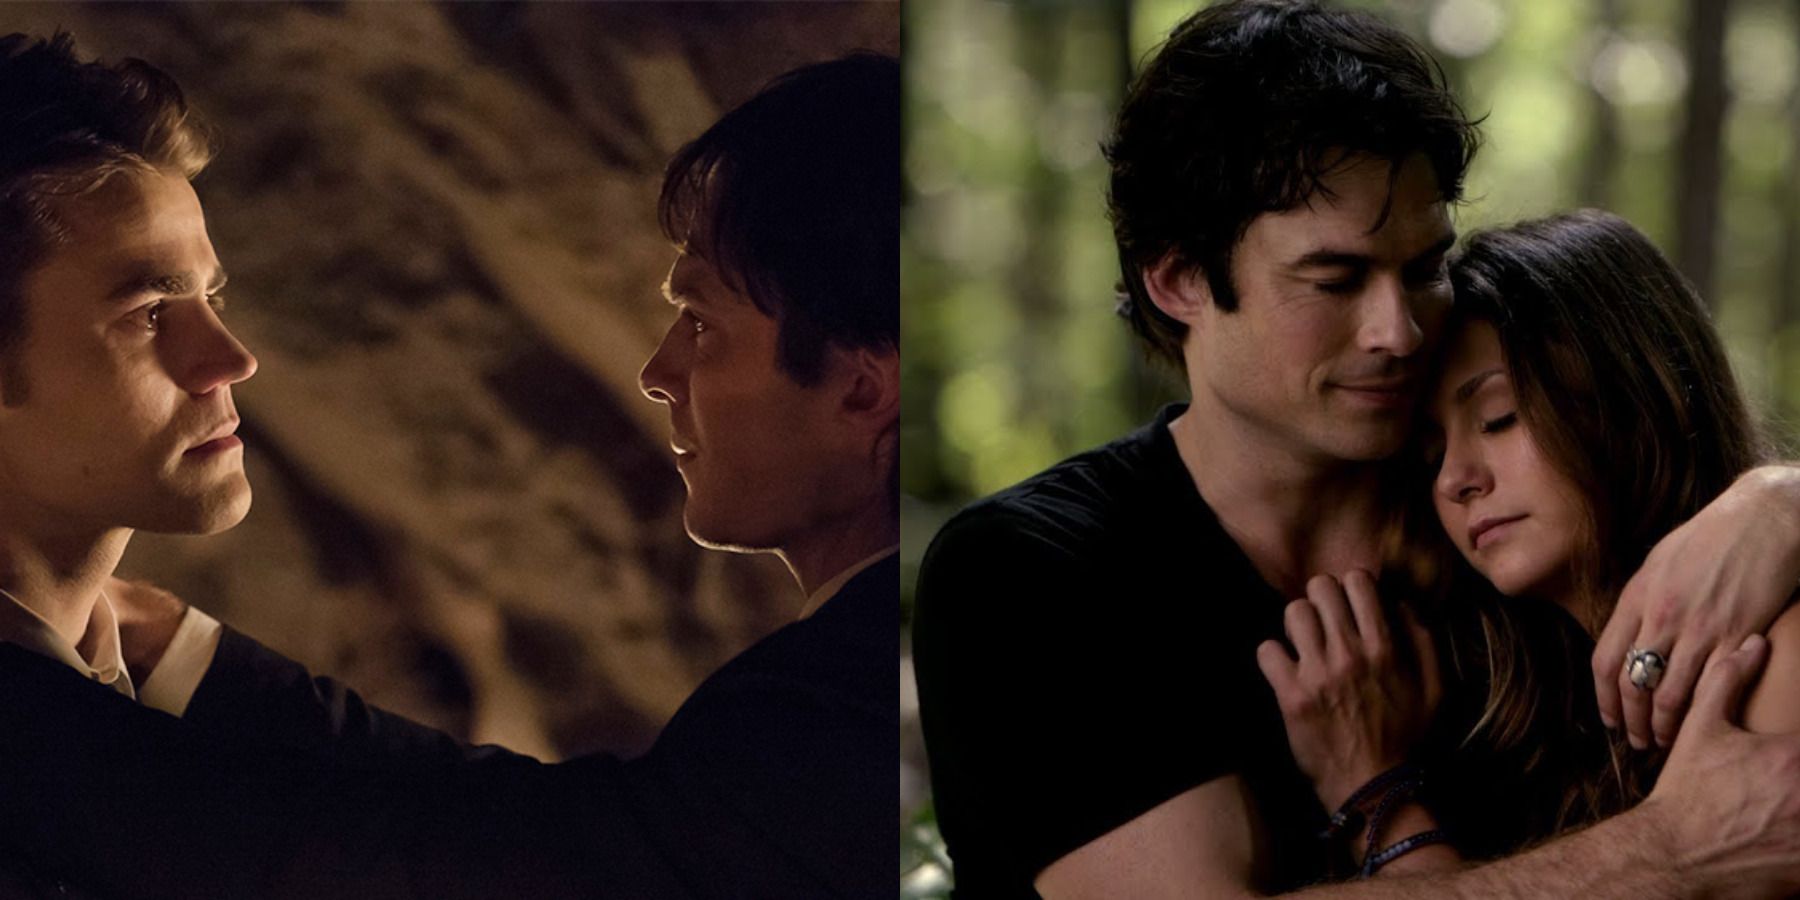 The Vampire Diaries Damon feature split image Damon with Stefan in the final episode and Damon is holding Elena in his arms